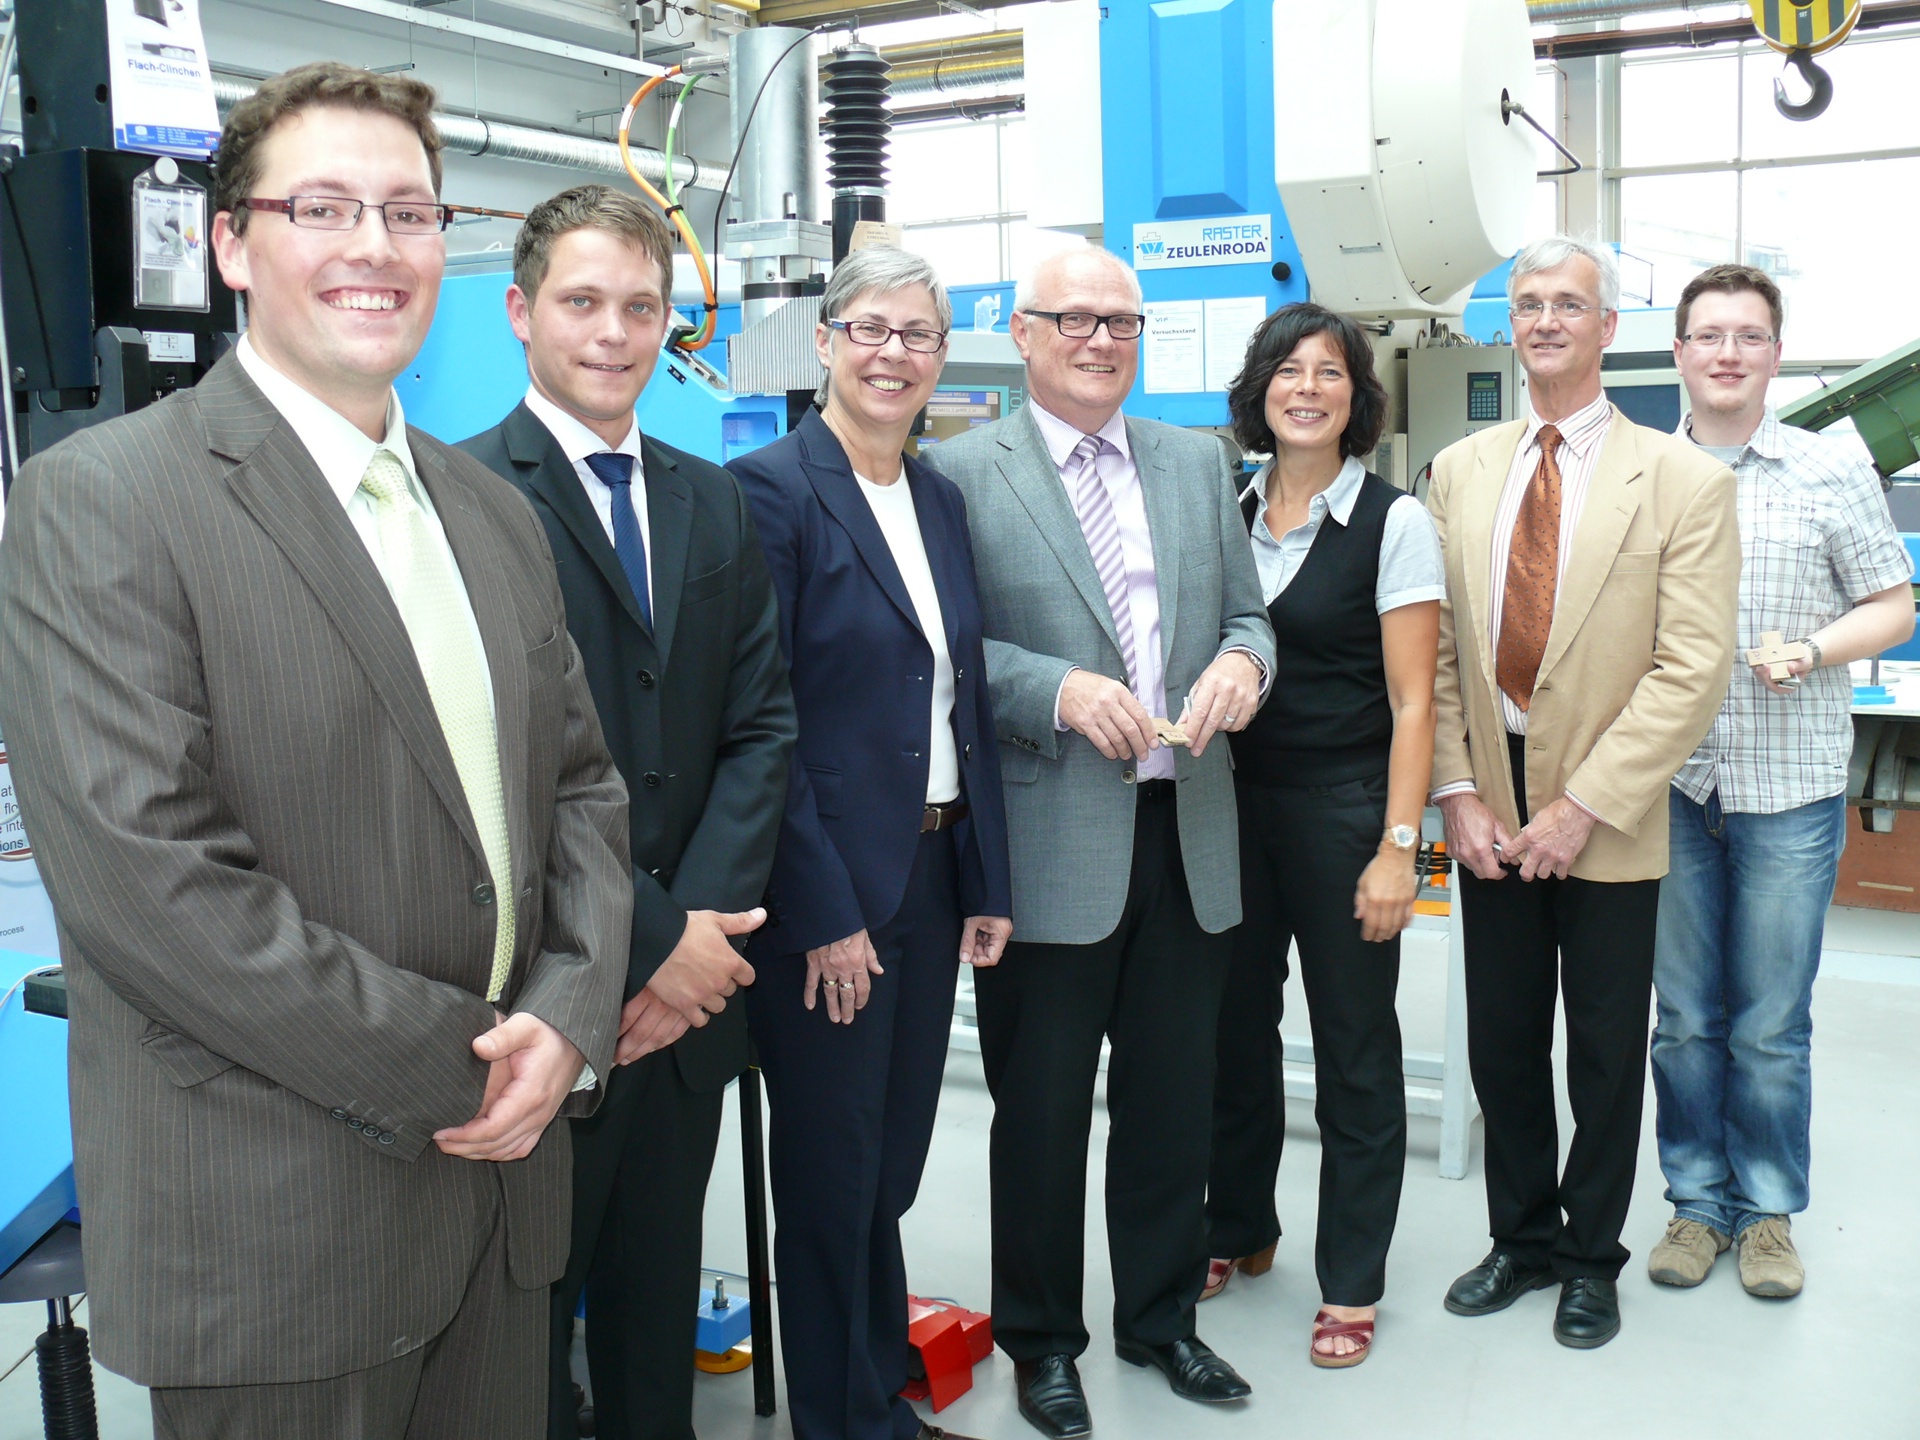 Participants at the commissioning of the new Eckold press